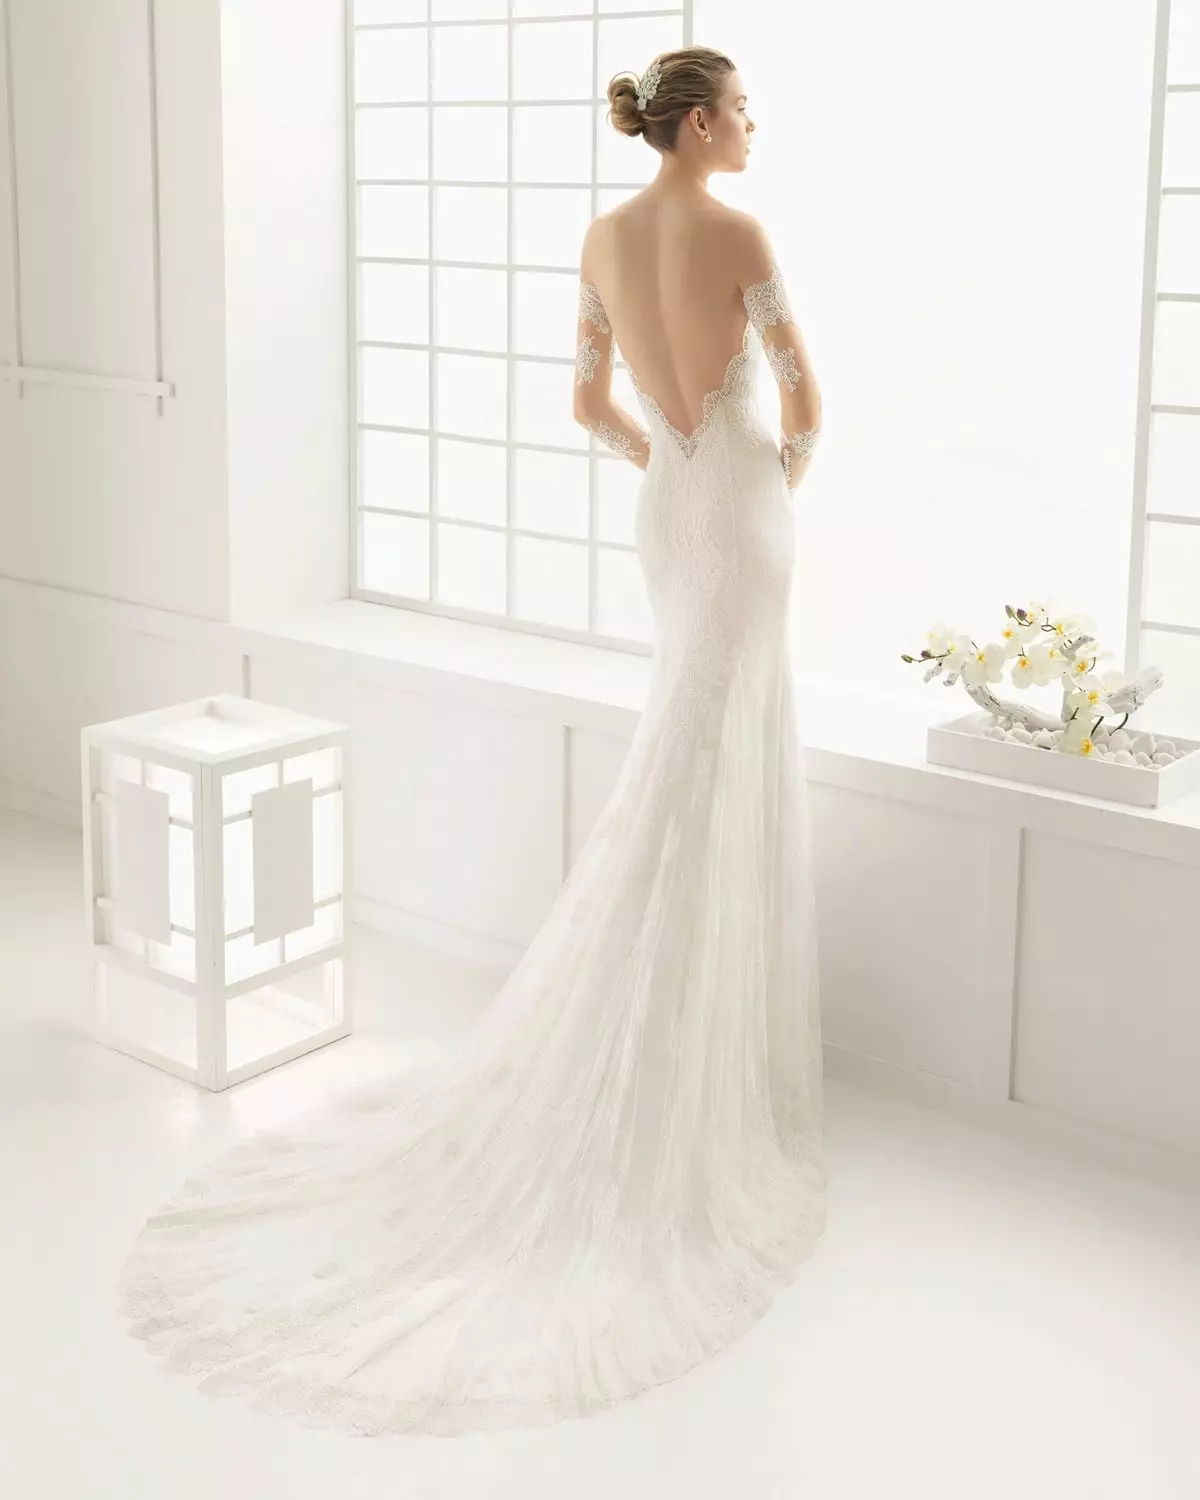 Wedding dress with fully open back